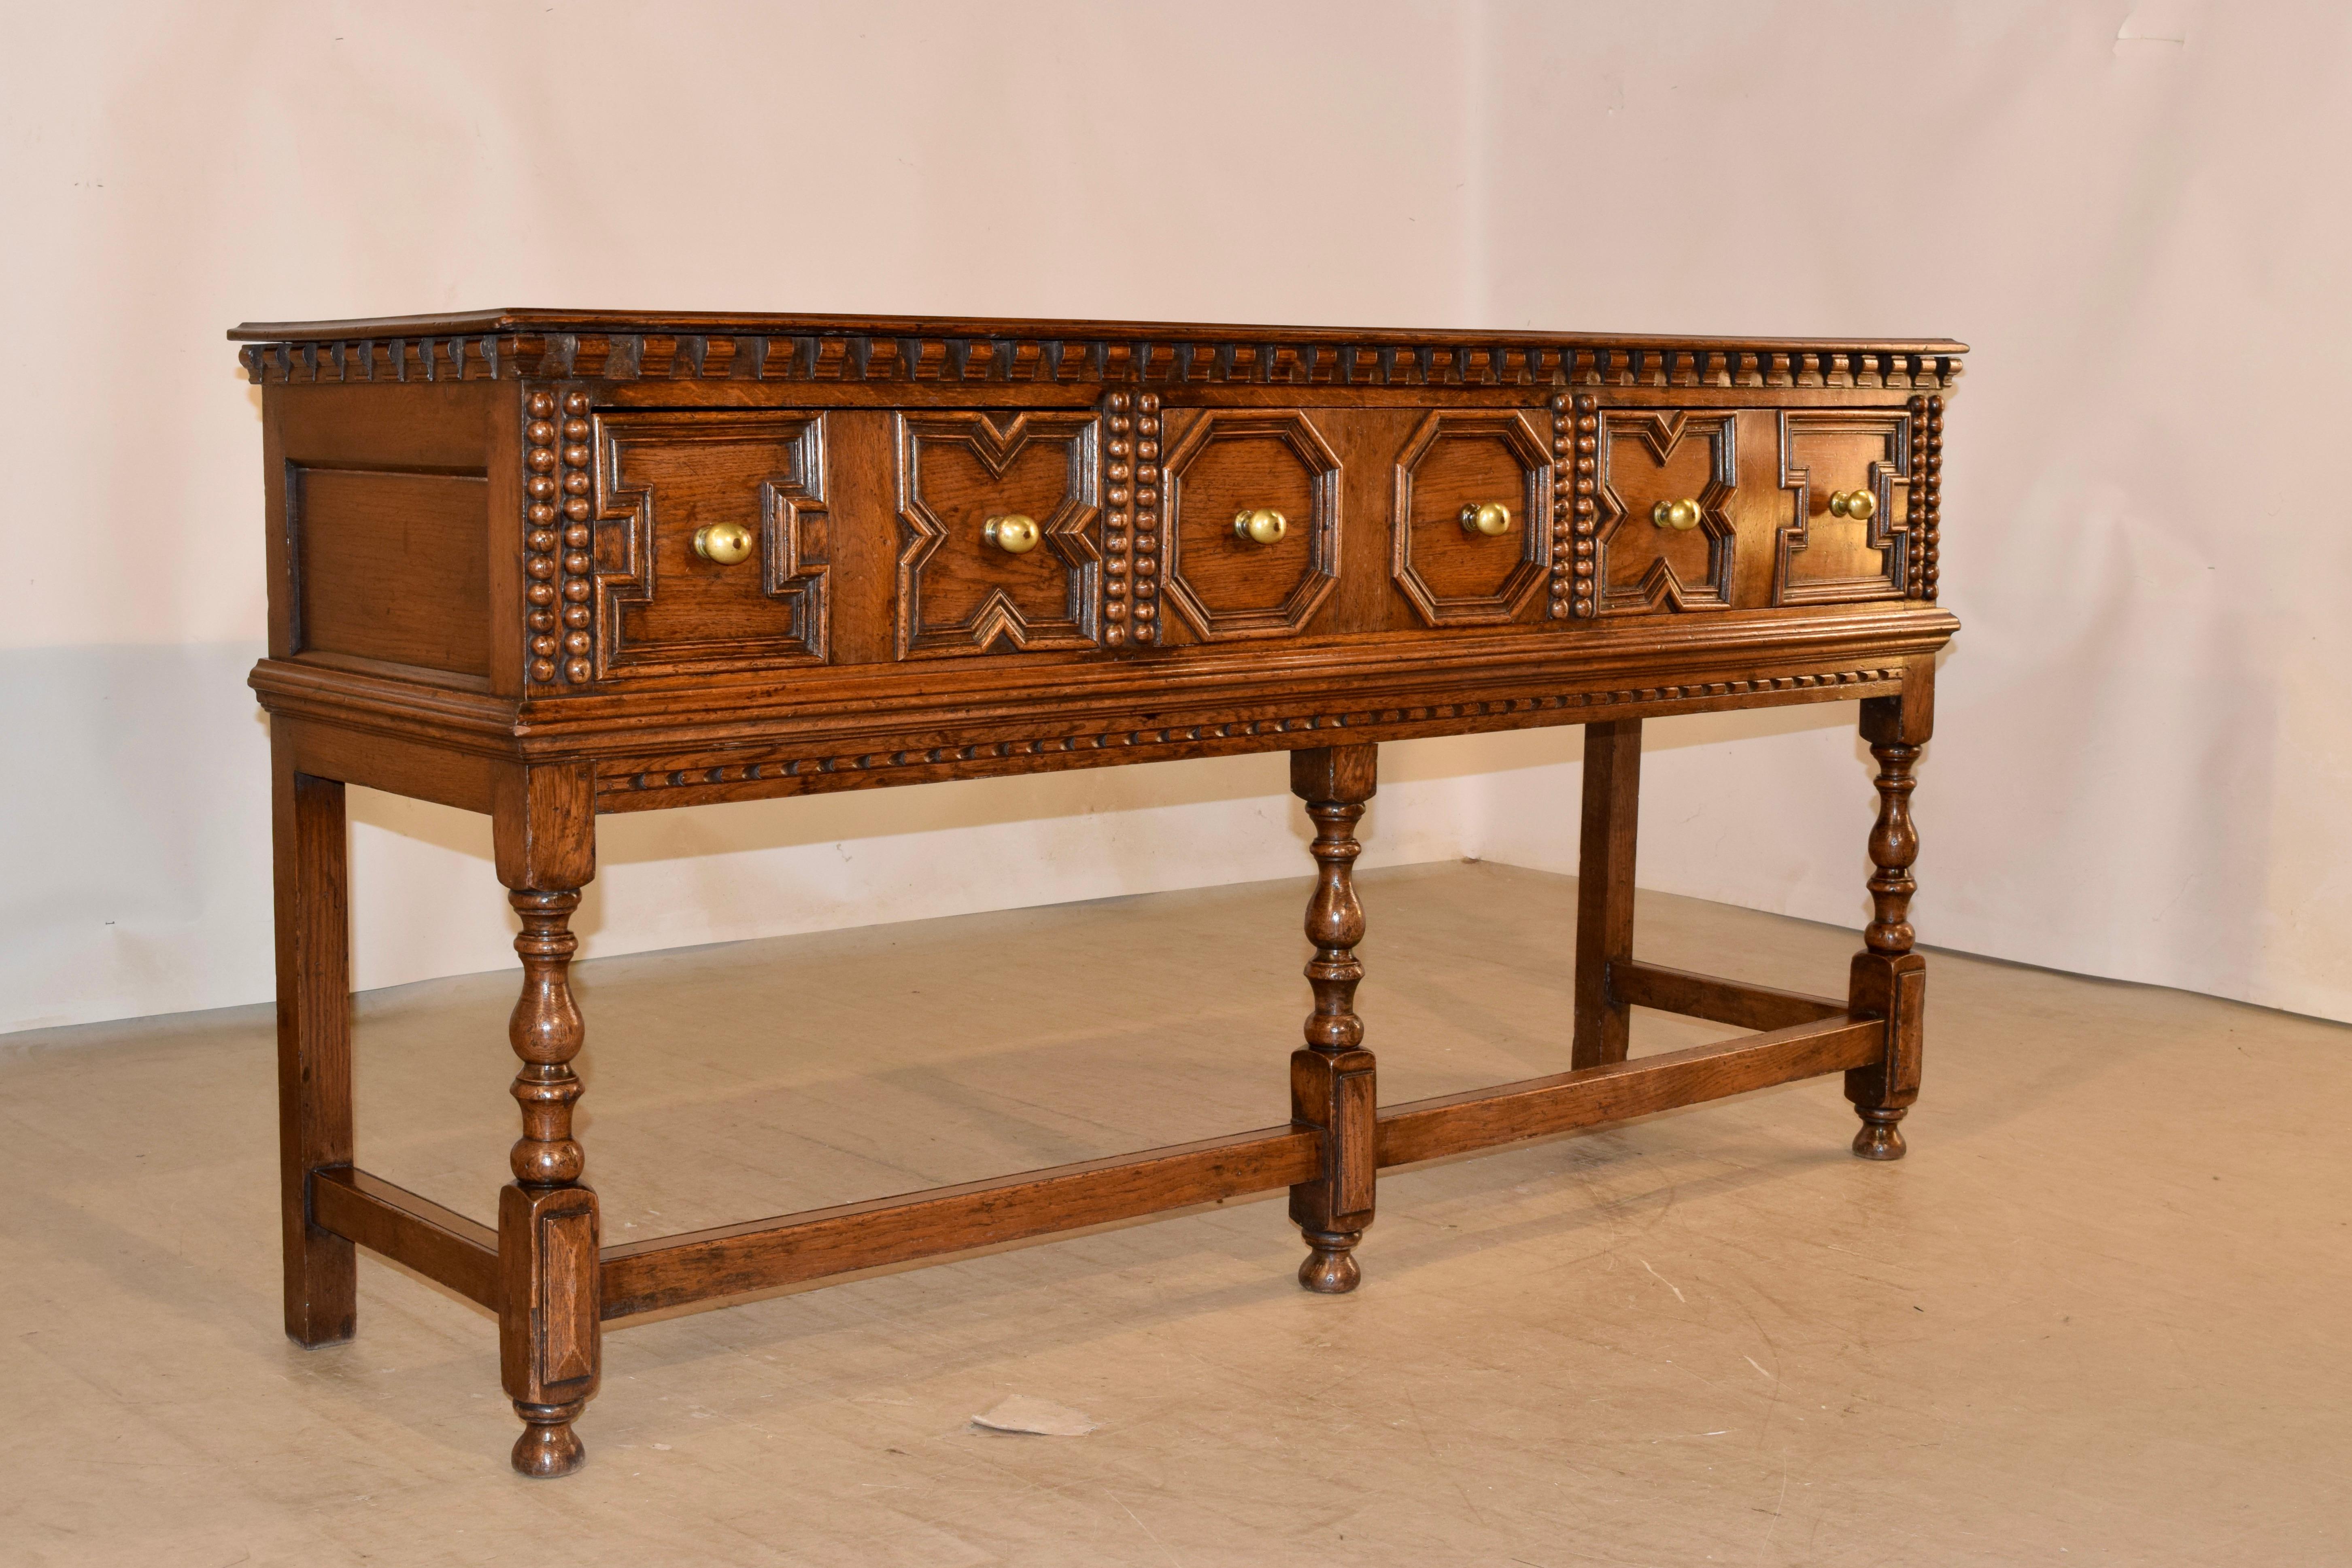 19th Century oak geometric sideboard from England. The top is made from a single board, and has a beveled edge, following down to wonderfully detailed applied corbel moldings on the case and paneled sides. There are three drawers in the front, all